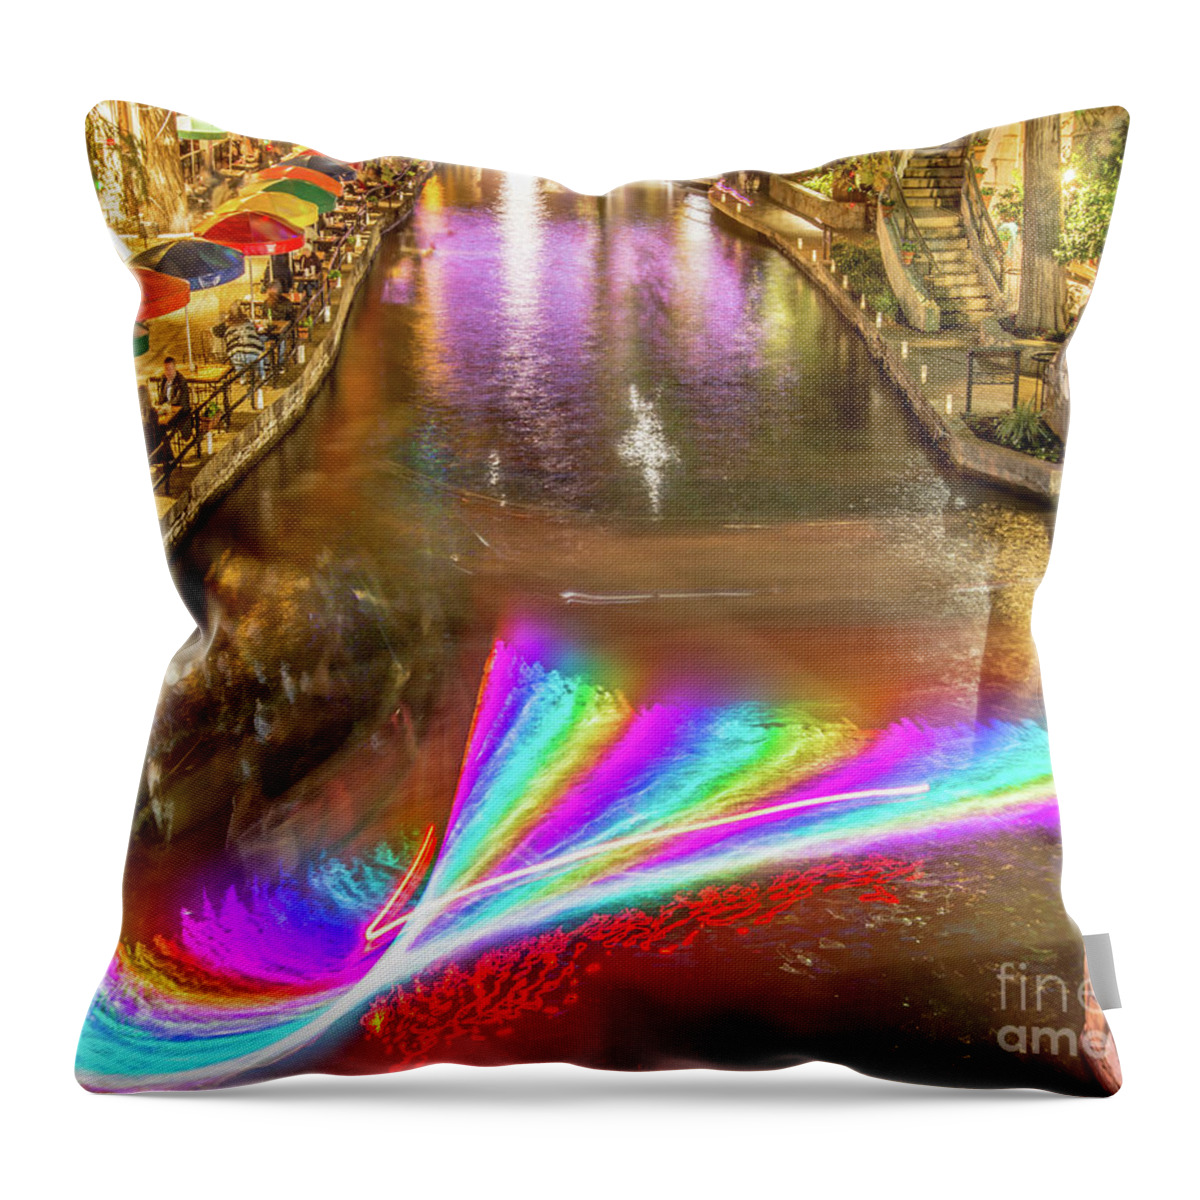 Casa Rio Prism Throw Pillow featuring the photograph Casa Rio Prism by Michael Tidwell